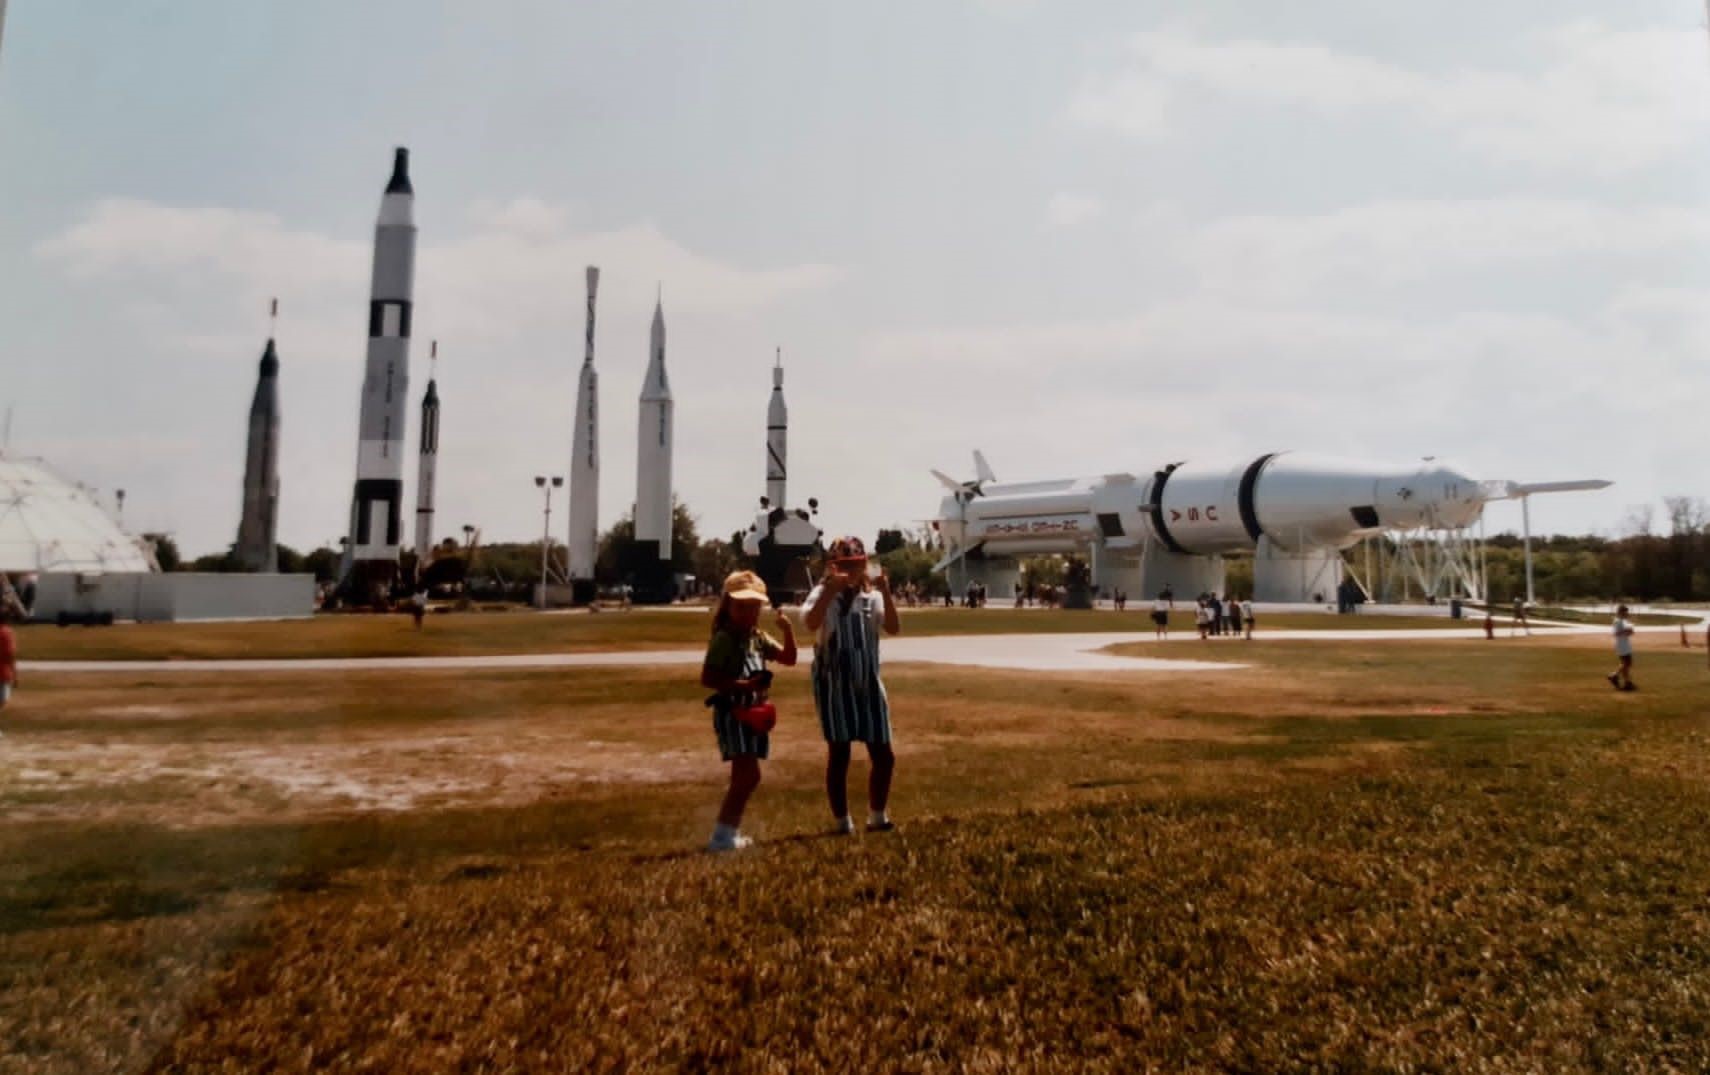 Sian Cleaver (left) as child, with her sister at Kennedy Space Centre 